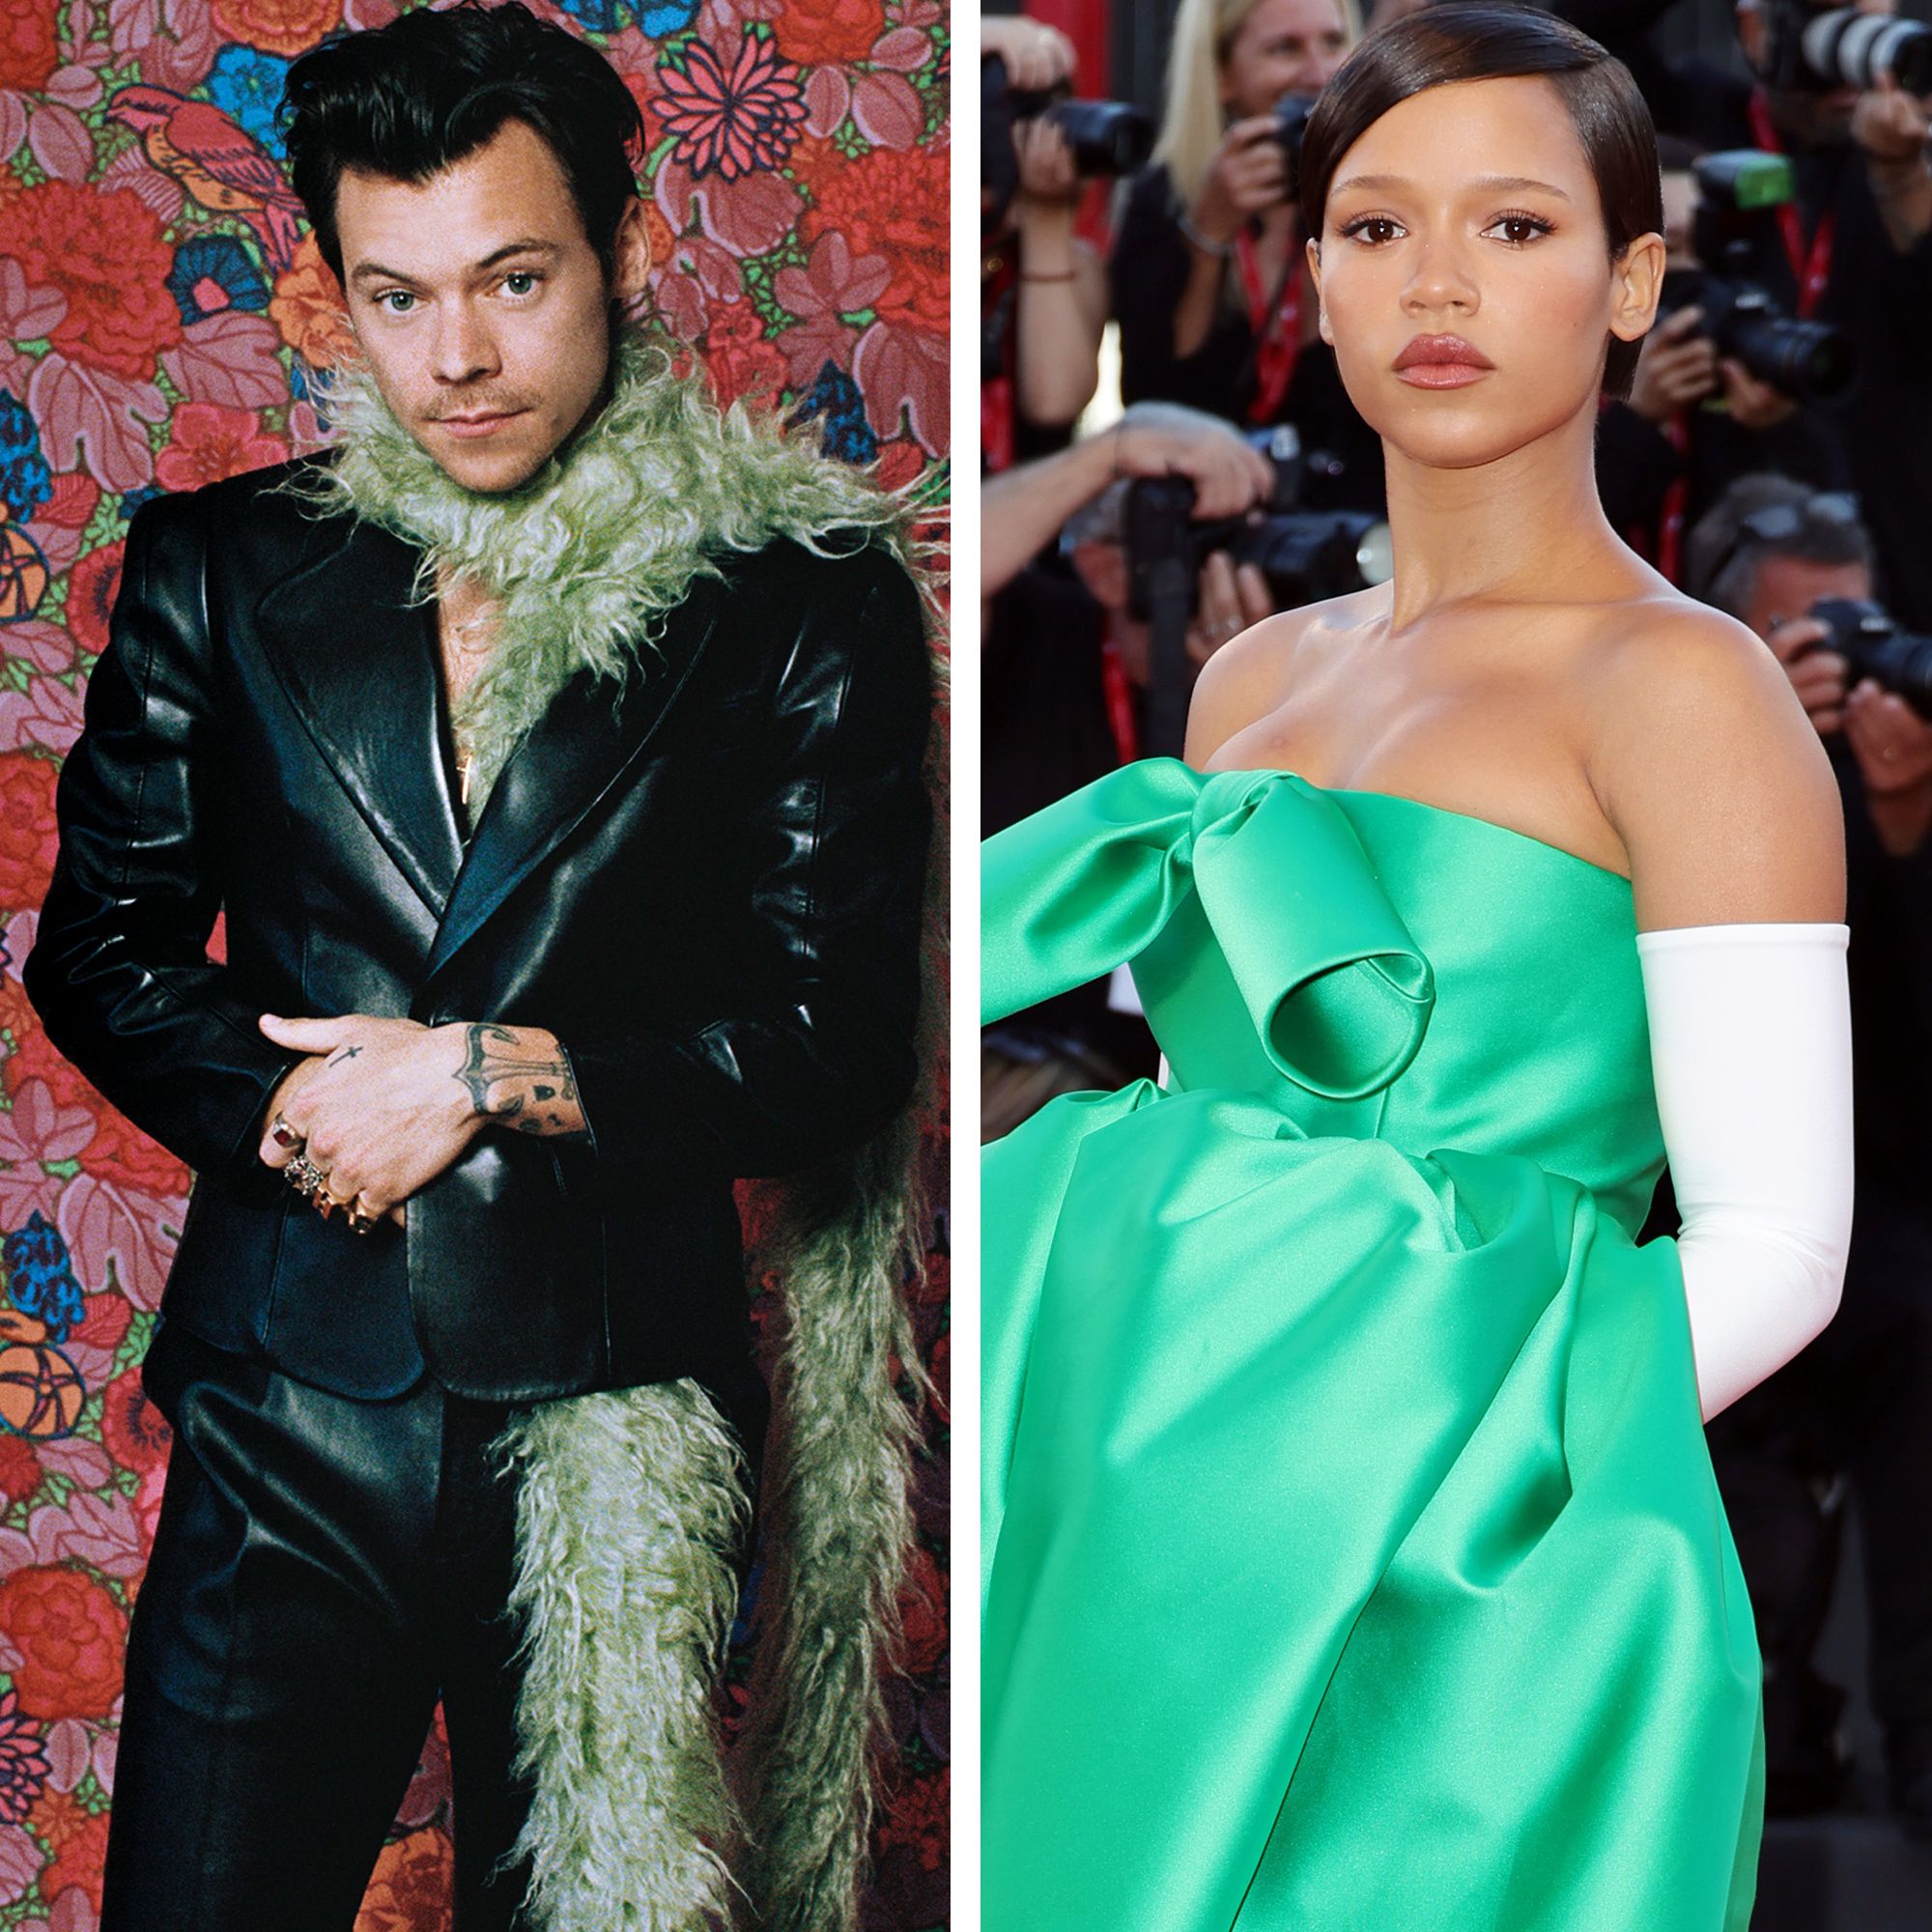 Taylor Russell and Harry Styles' Full Relationship Timeline